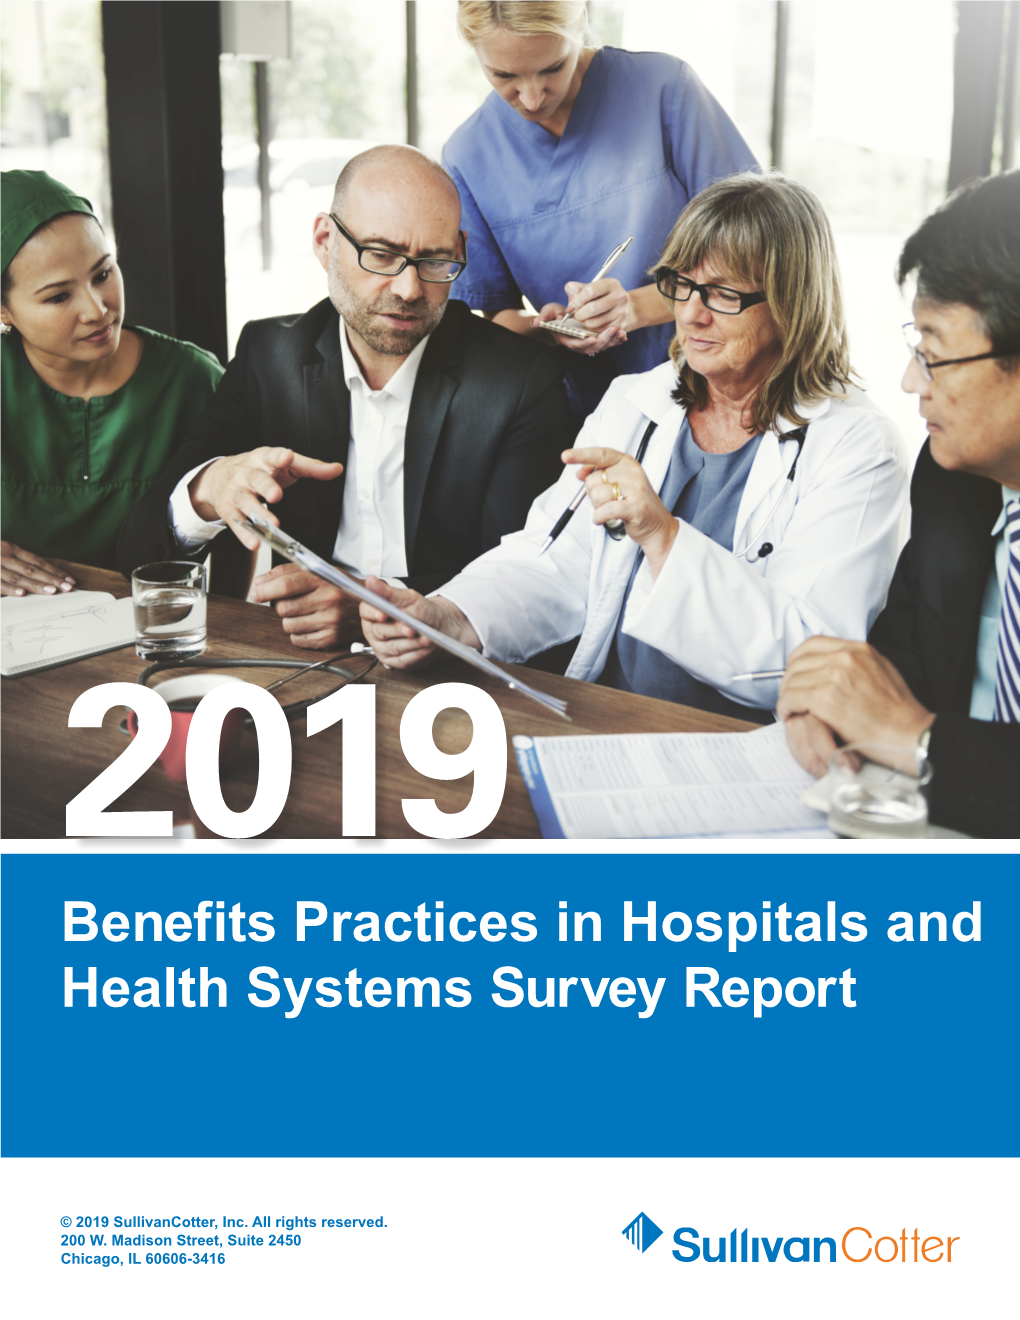 Benefits Practices in Hospitals and Health Systems Survey Report